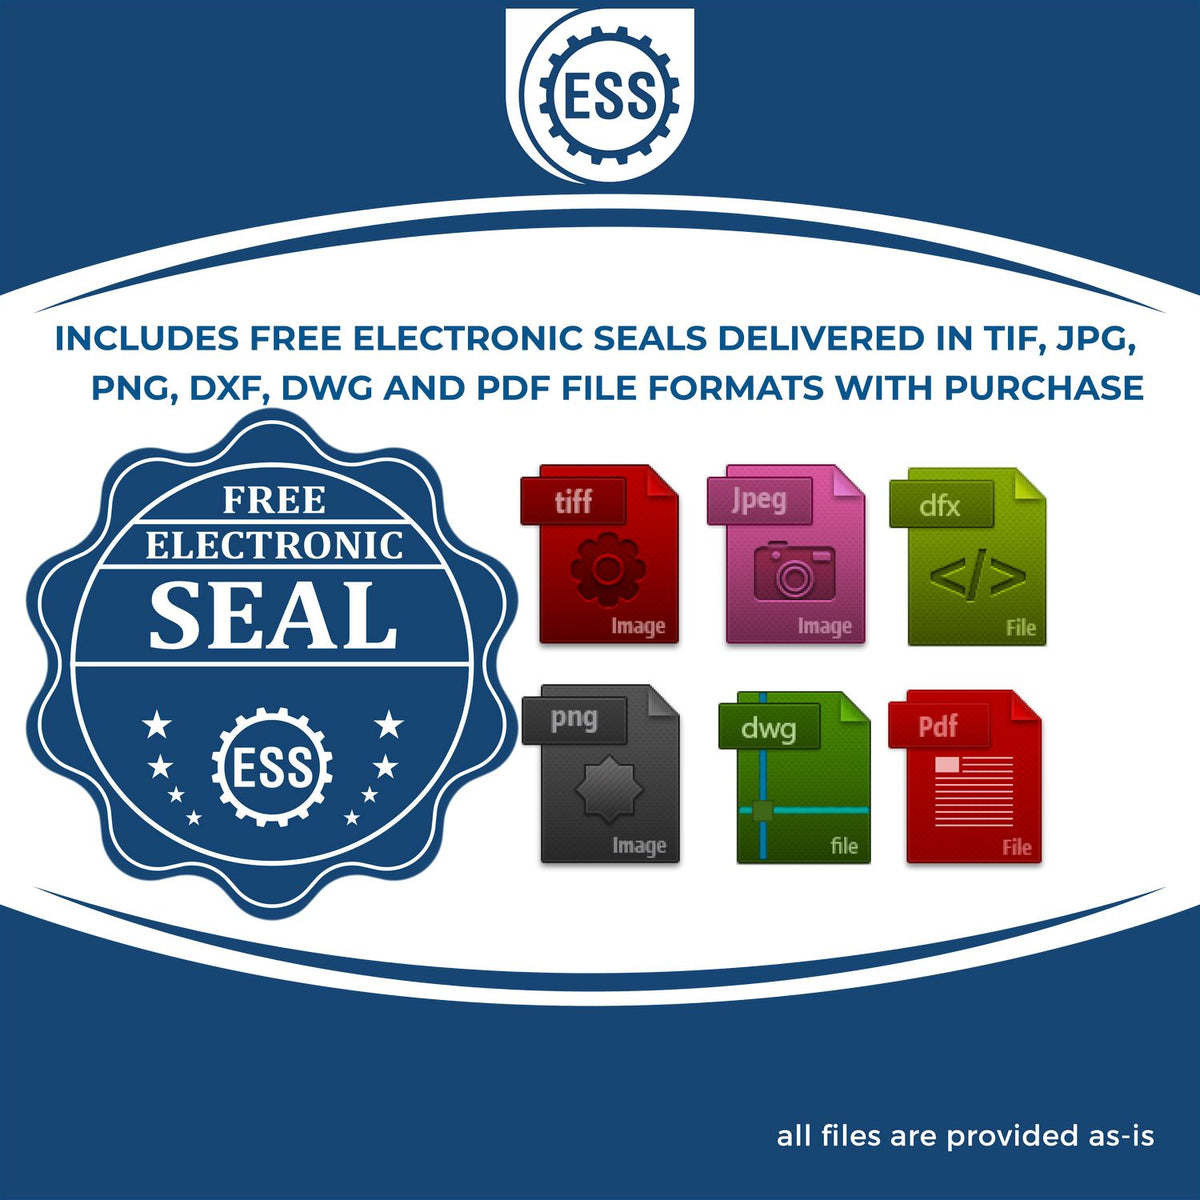 An infographic for the free electronic seal for the Heavy Duty Cast Iron North Dakota Engineer Seal Embosser illustrating the different file type icons such as DXF, DWG, TIF, JPG and PNG.